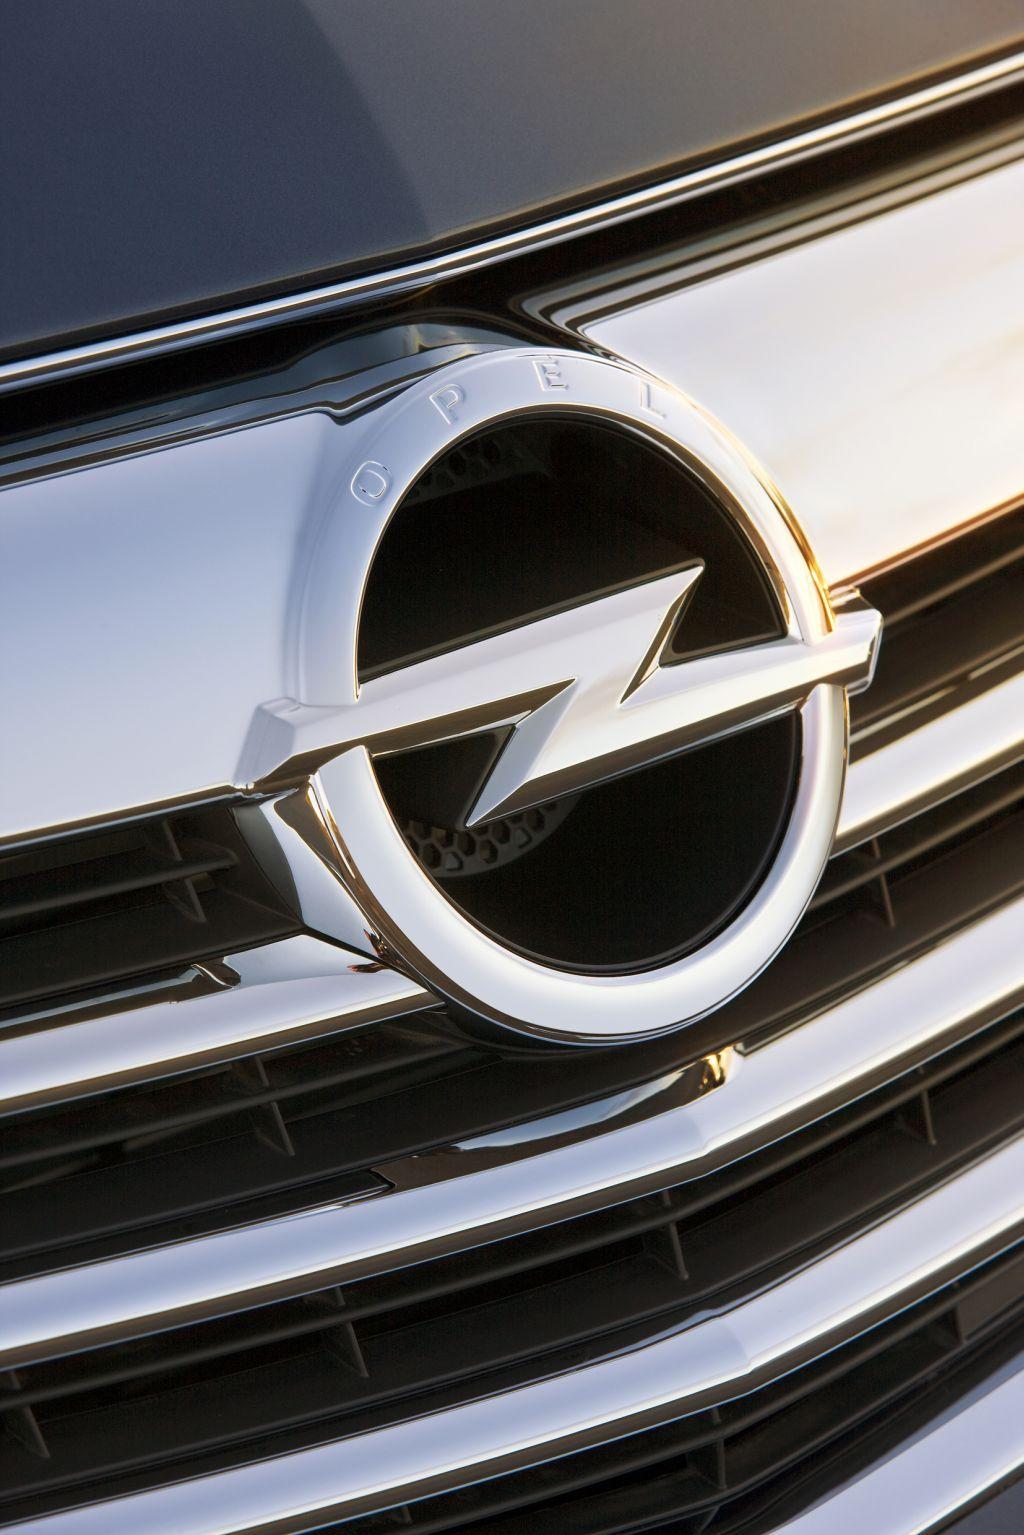 Circle with Lightning Bolt Car Logo - Refined Opel logo expresses brand's new confidence